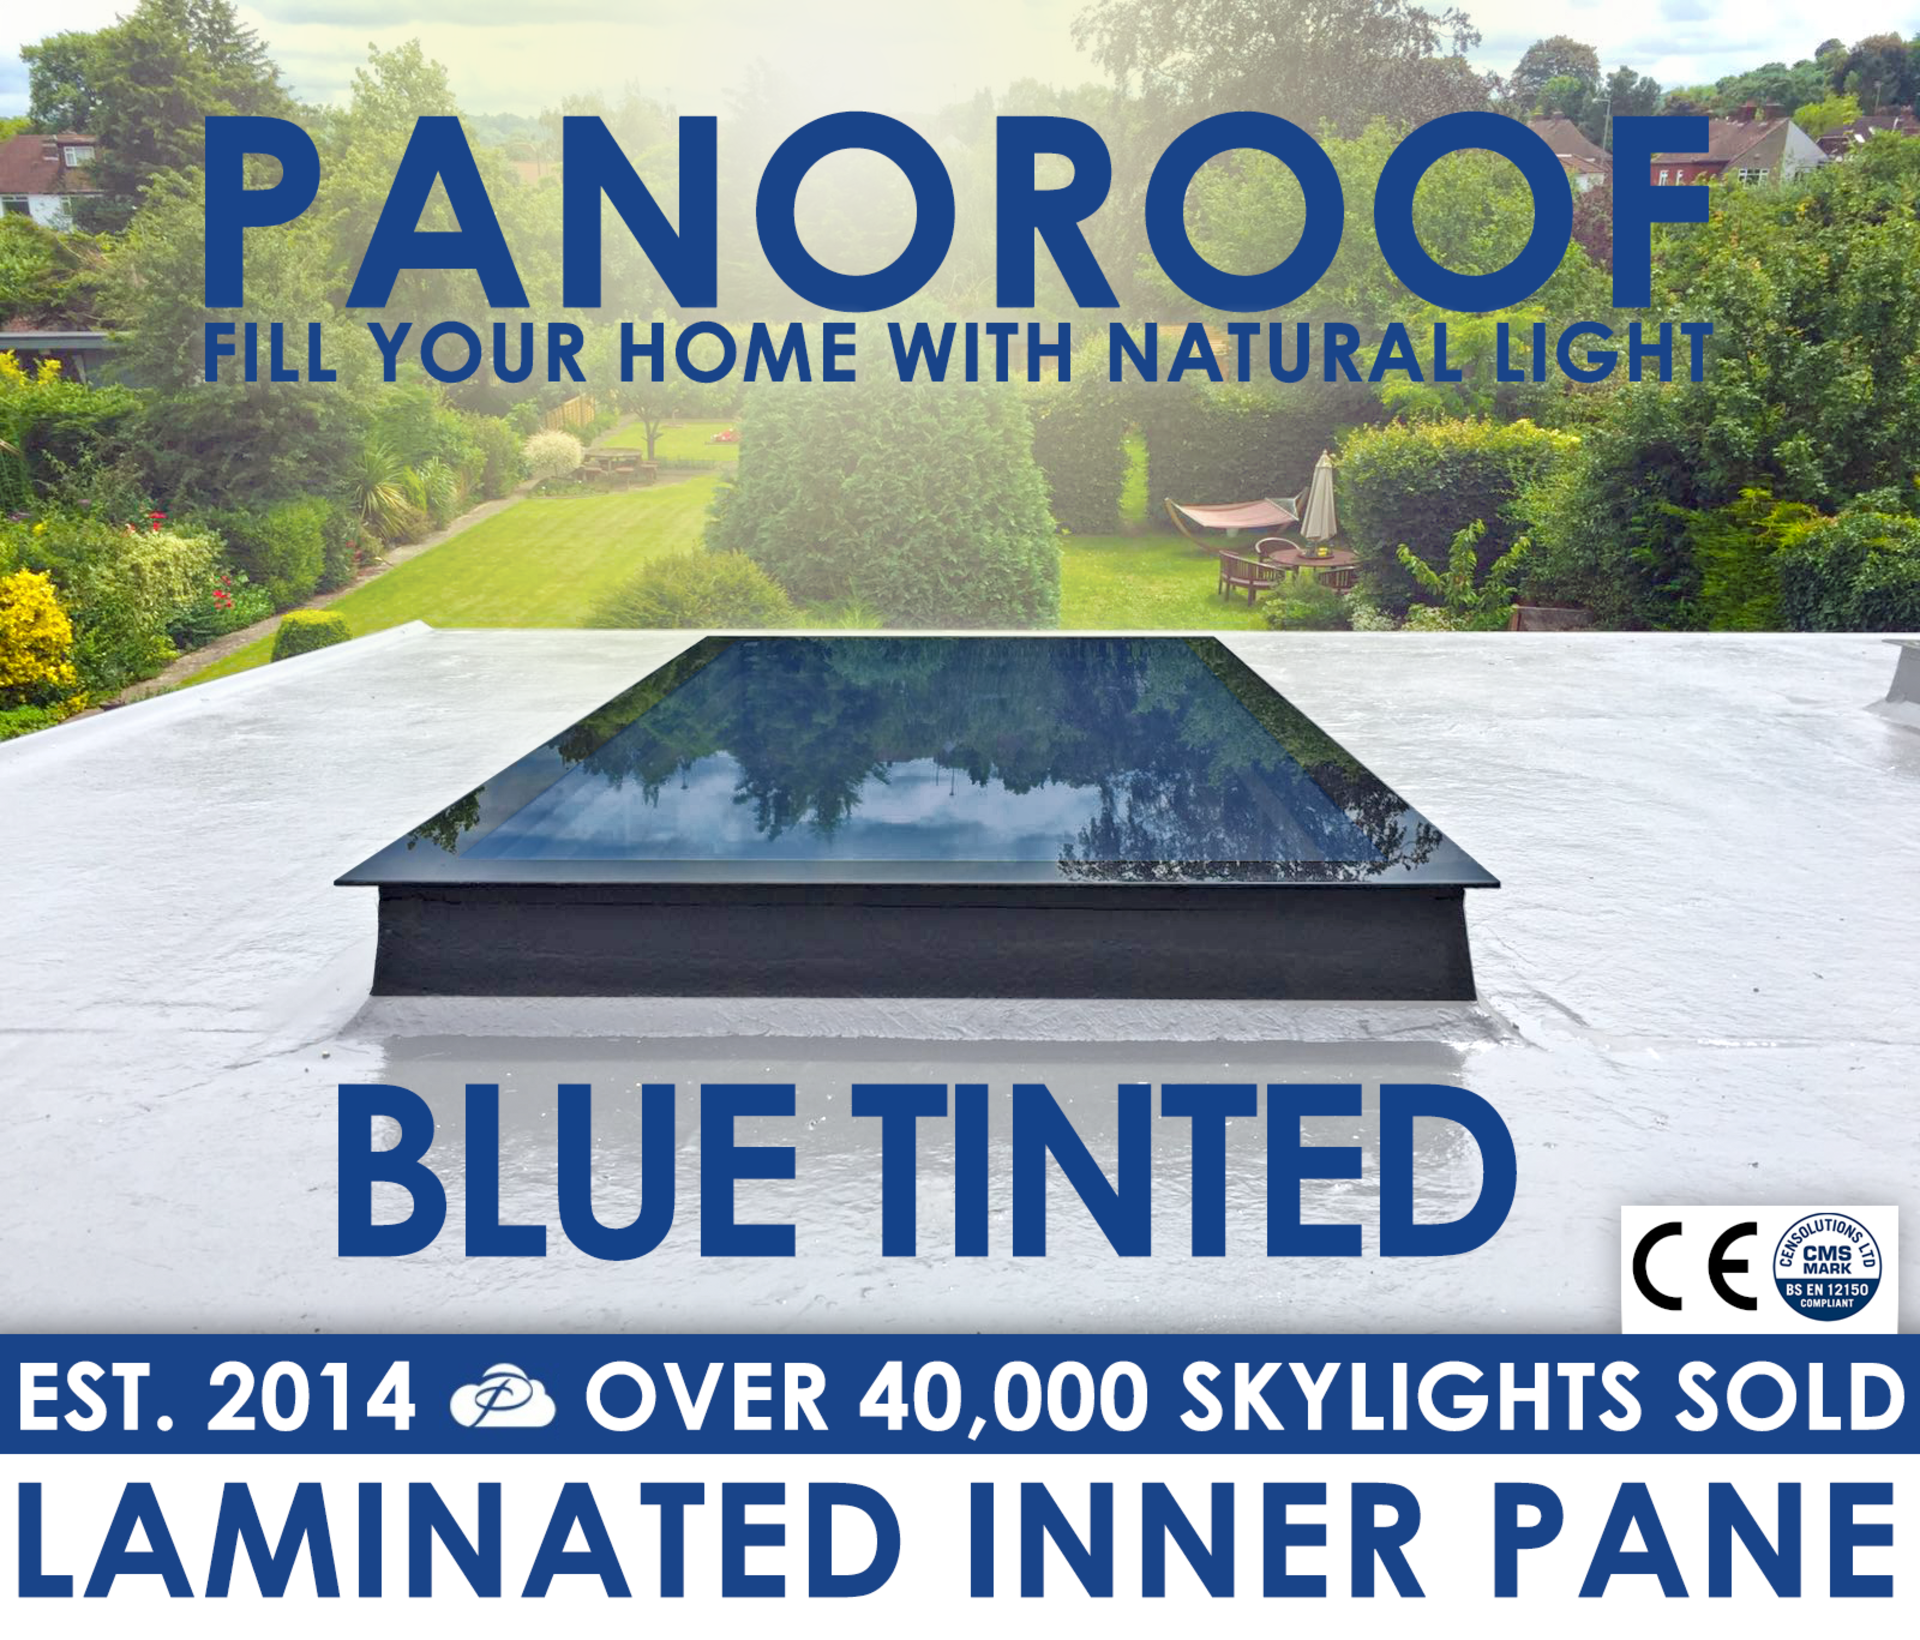 Panoroof 800x1000mm BLUE TINTED GLASS Triple Glazed Self Cleaning WITH 8.8mm LAMINATED INNER PANE (